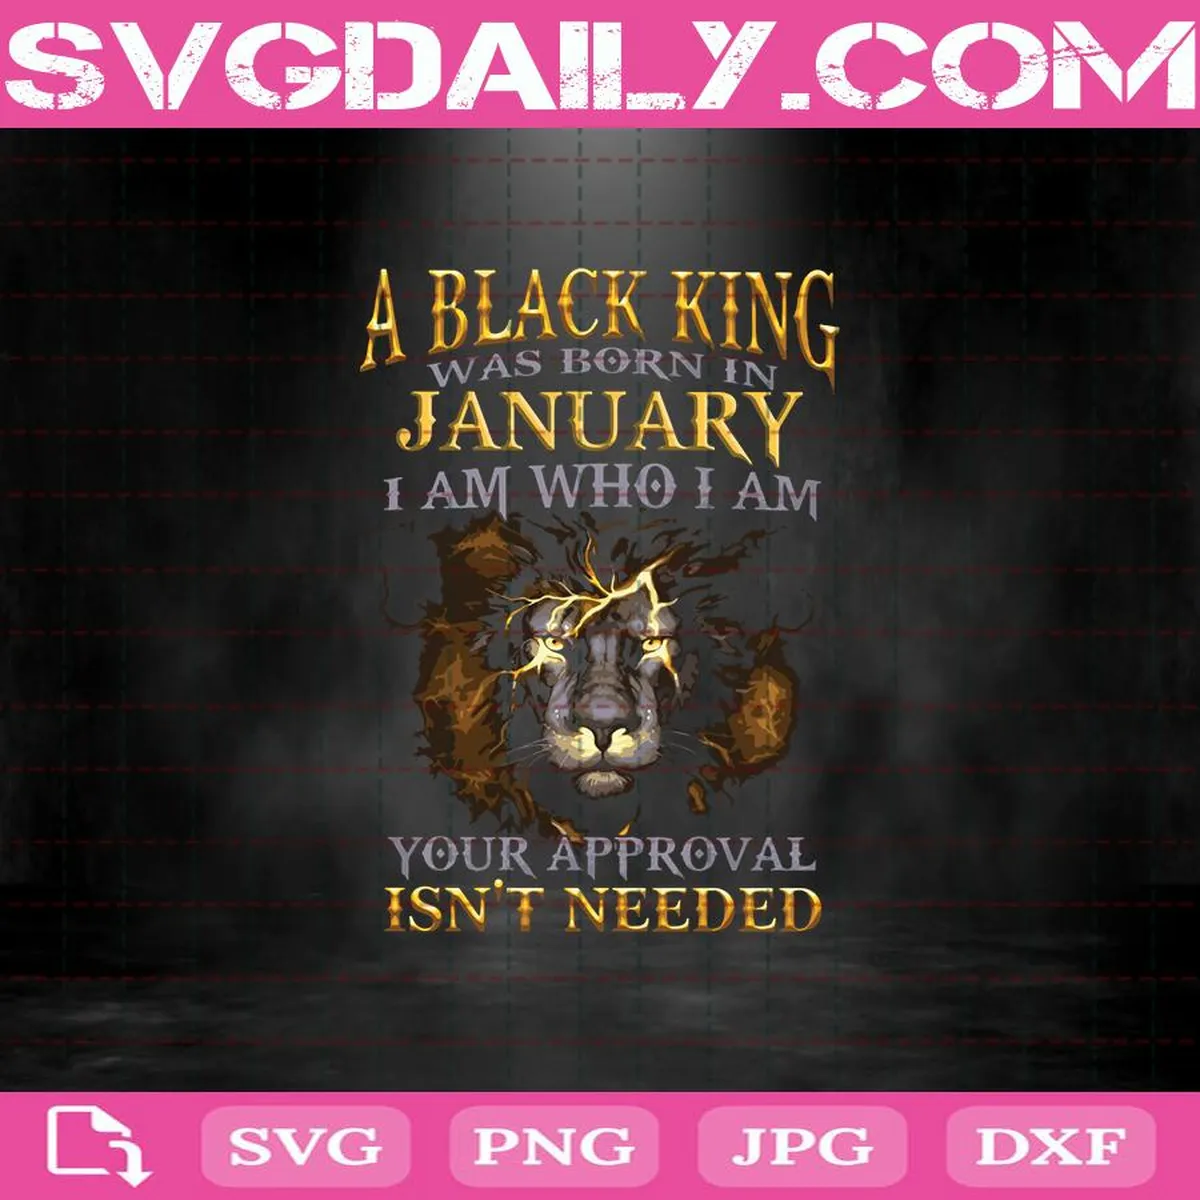 A Black King Was Born In January I Am Who I Am Your Approval Isn't Needed Svg, Black King Svg, January Svg, January King Svg, Born In January Svg, Birthday Svg